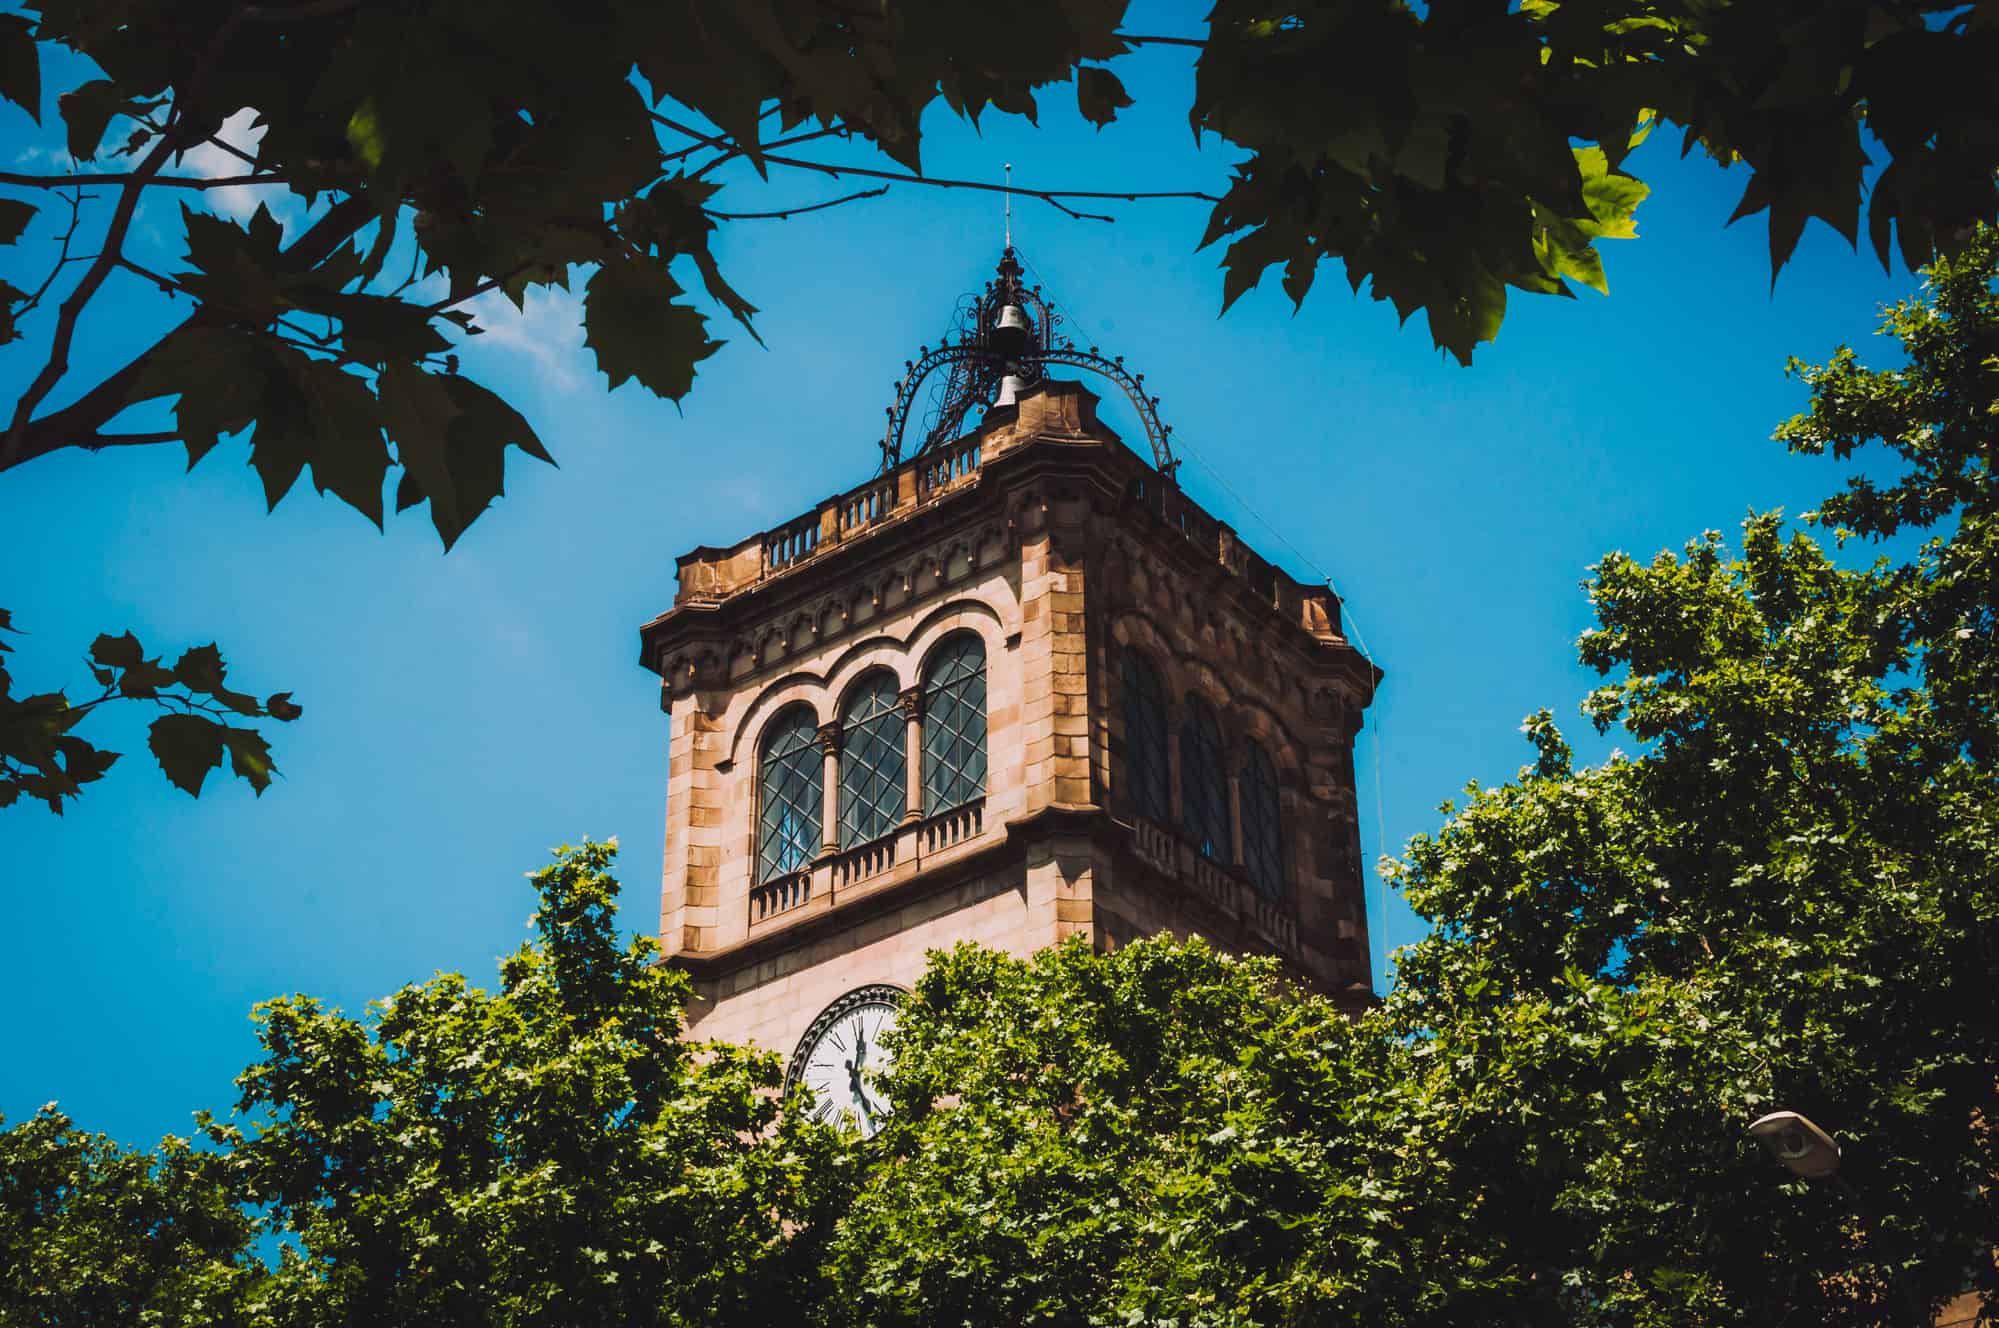 Clock tower of the University of Barcelona through the foliage